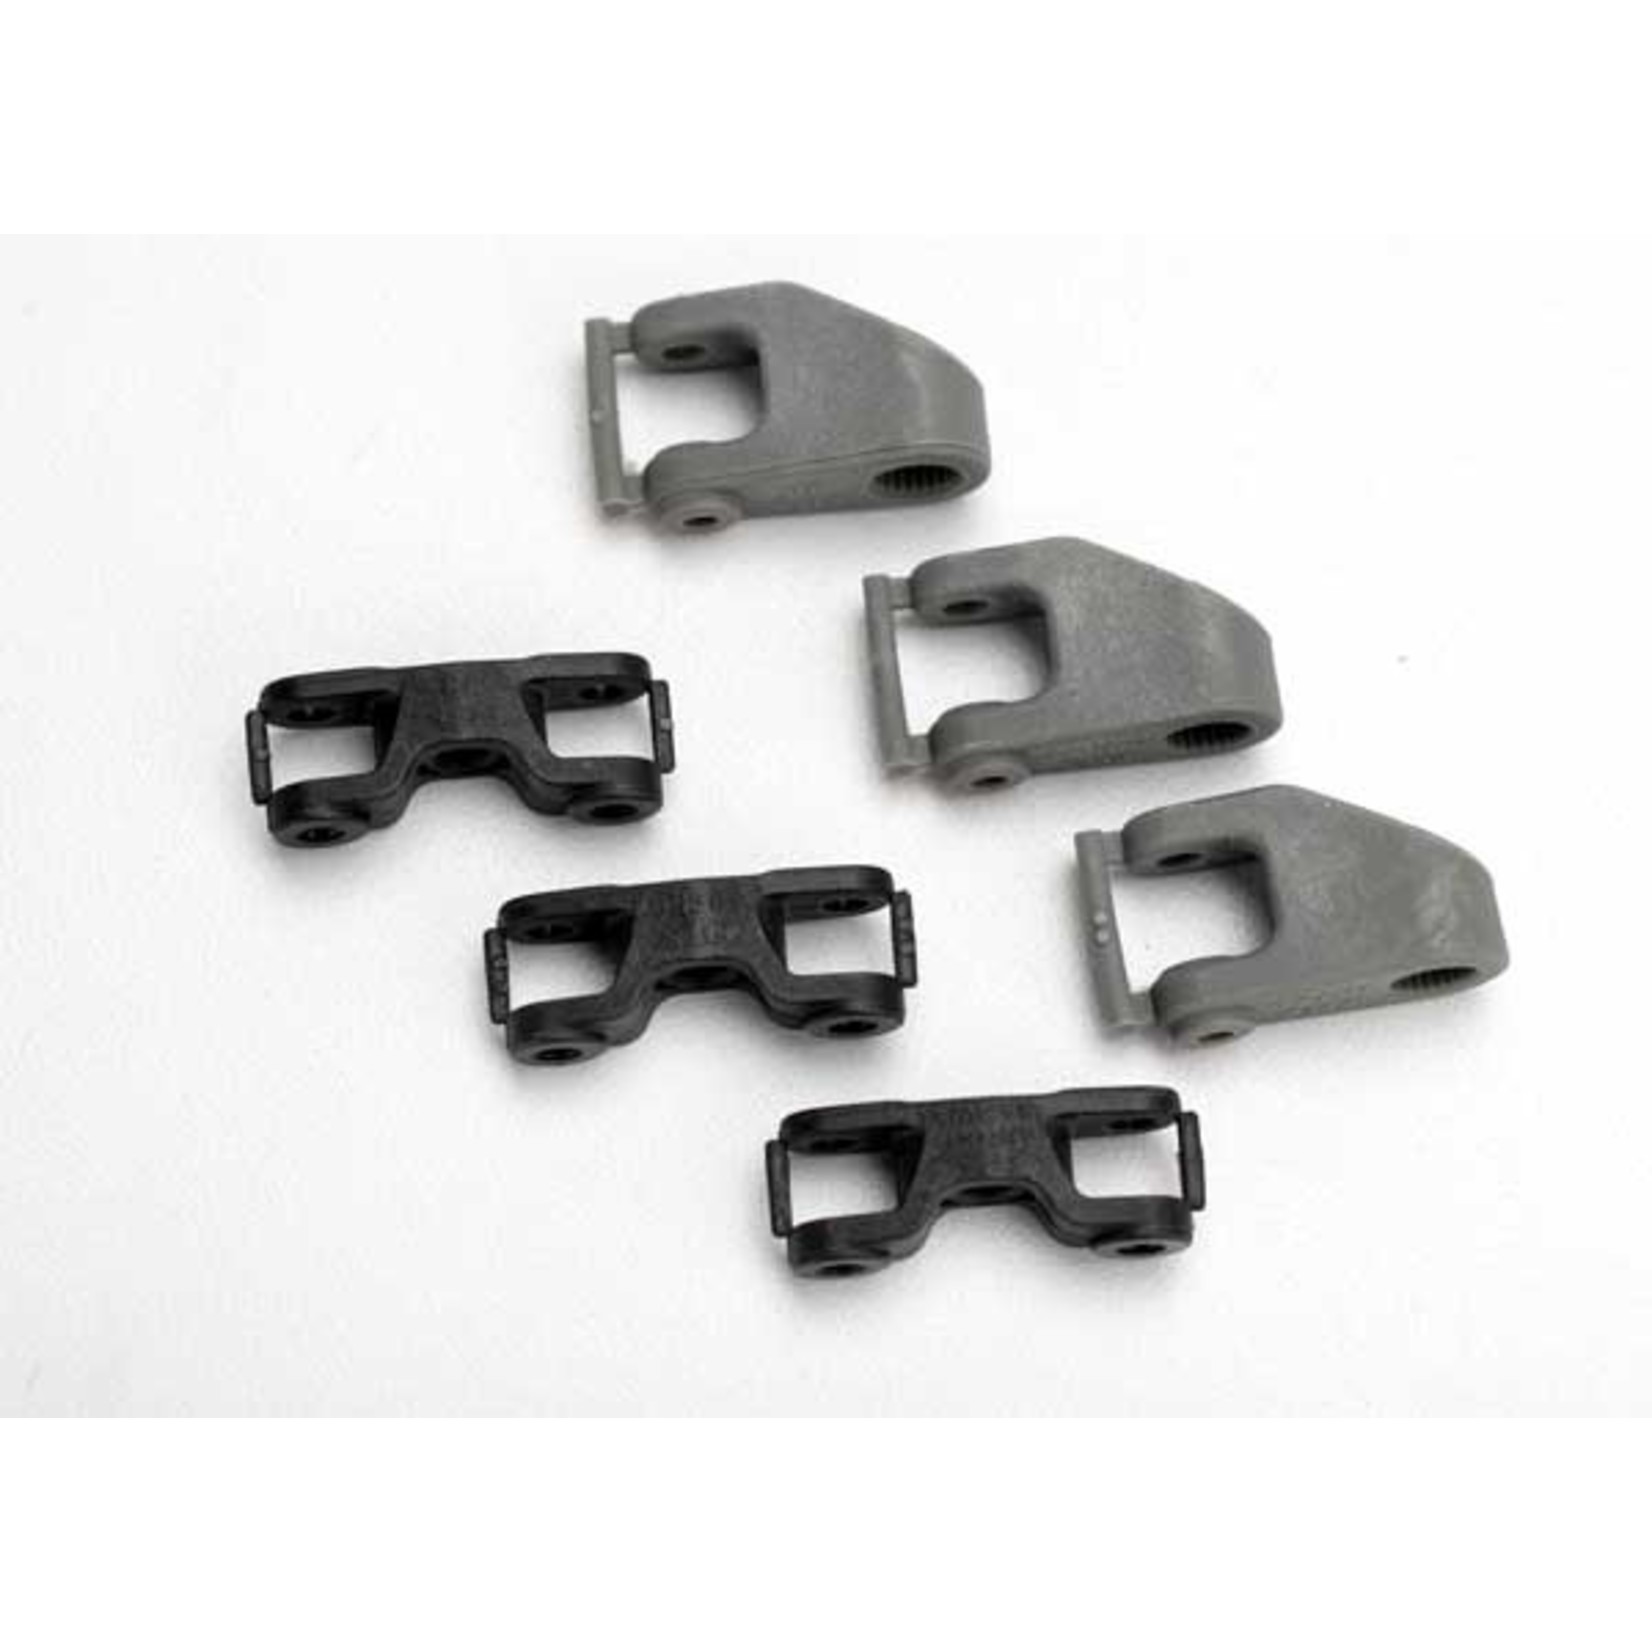 Traxxas 5545X - Servo horns, steering and throttle (for no